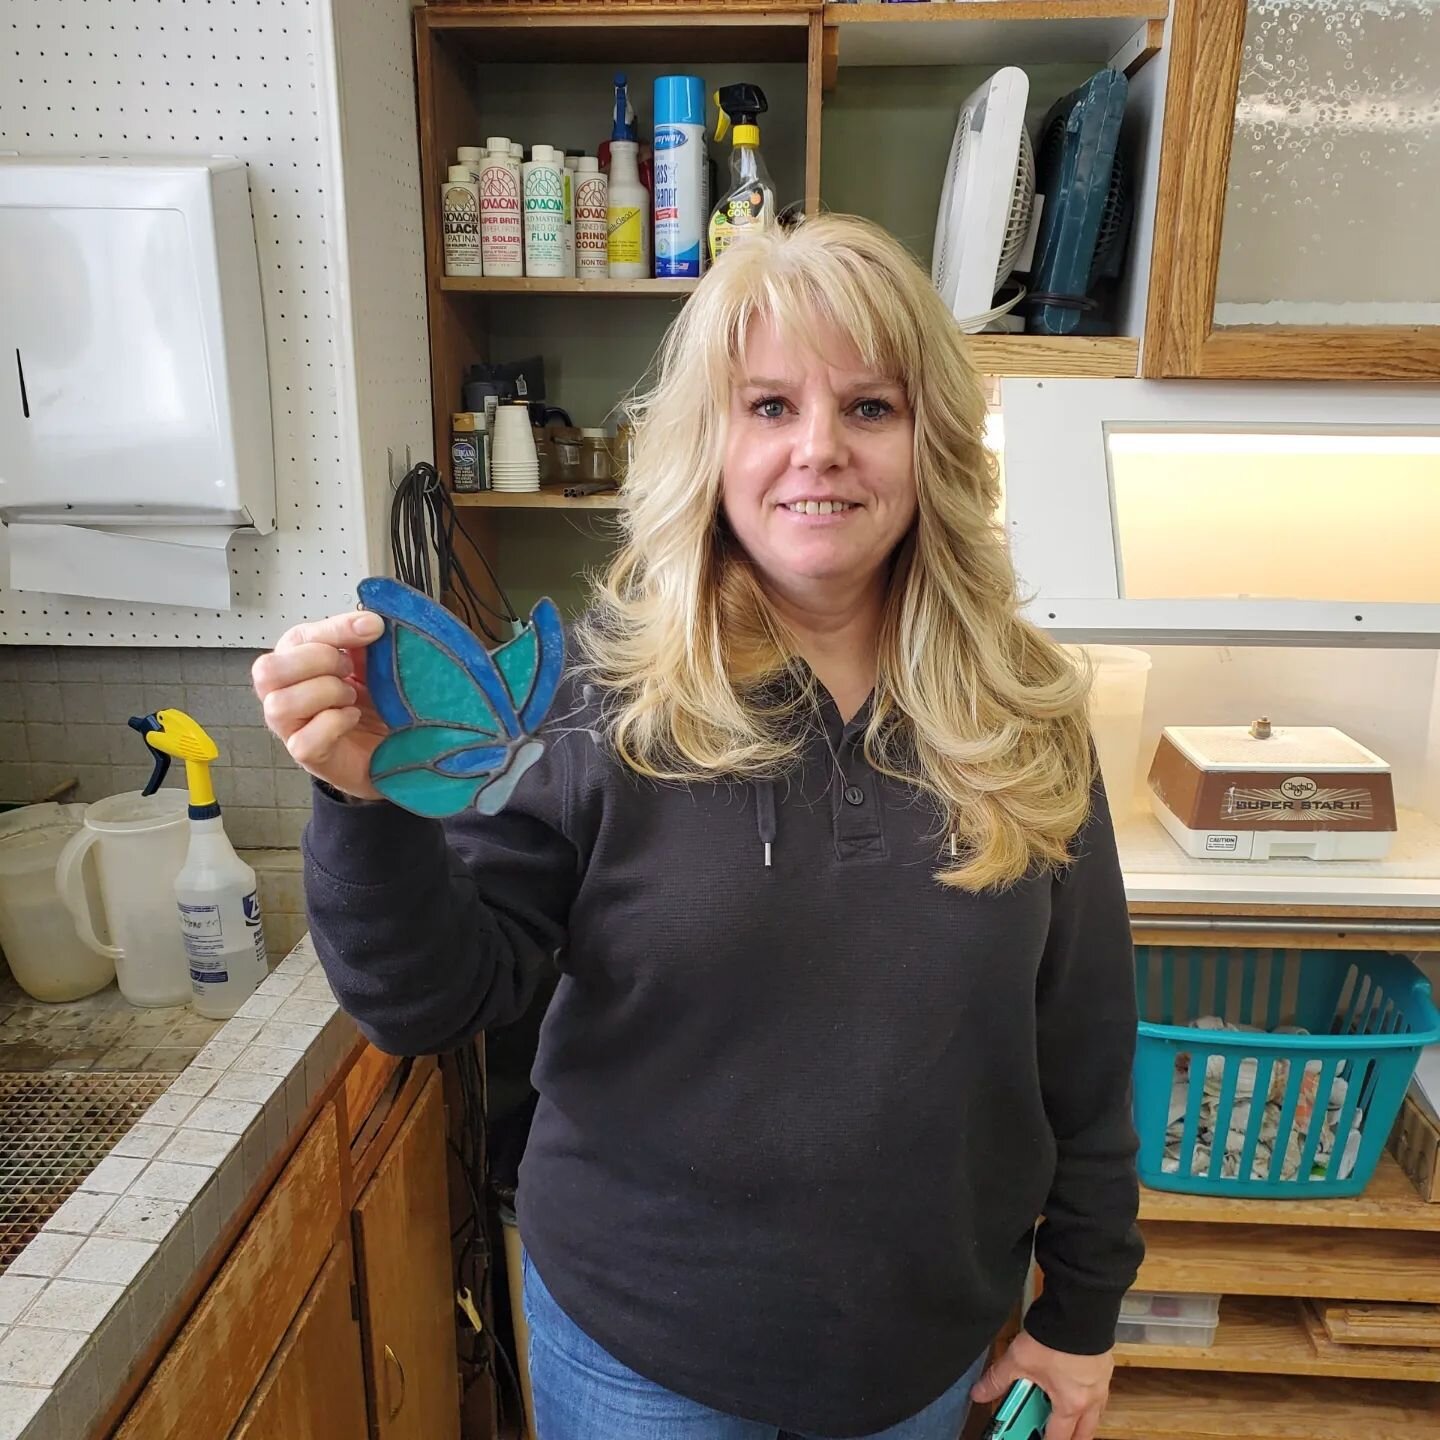 This lovely lady made a beautiful stained glass butterfly today in our one day beginner class. Looking to learn the art of stained glass? Come book a class with us today and change your life! www.theglasspeacock.com
#stainedglass #stainedglassclasses